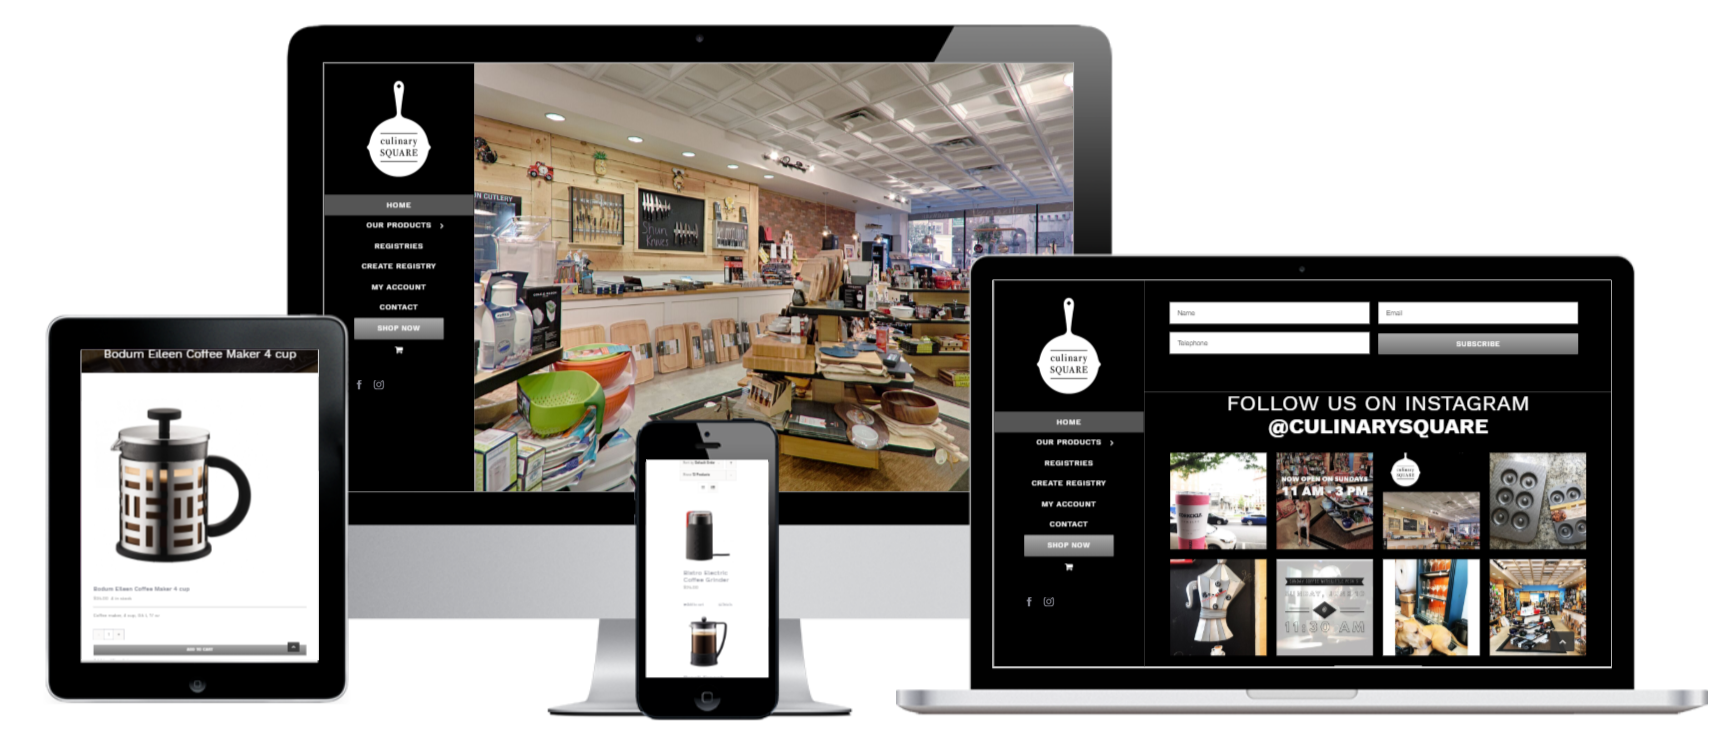 Culinary Square Troy, NY WordPress WooCommerce Credit Card Payment Gateway